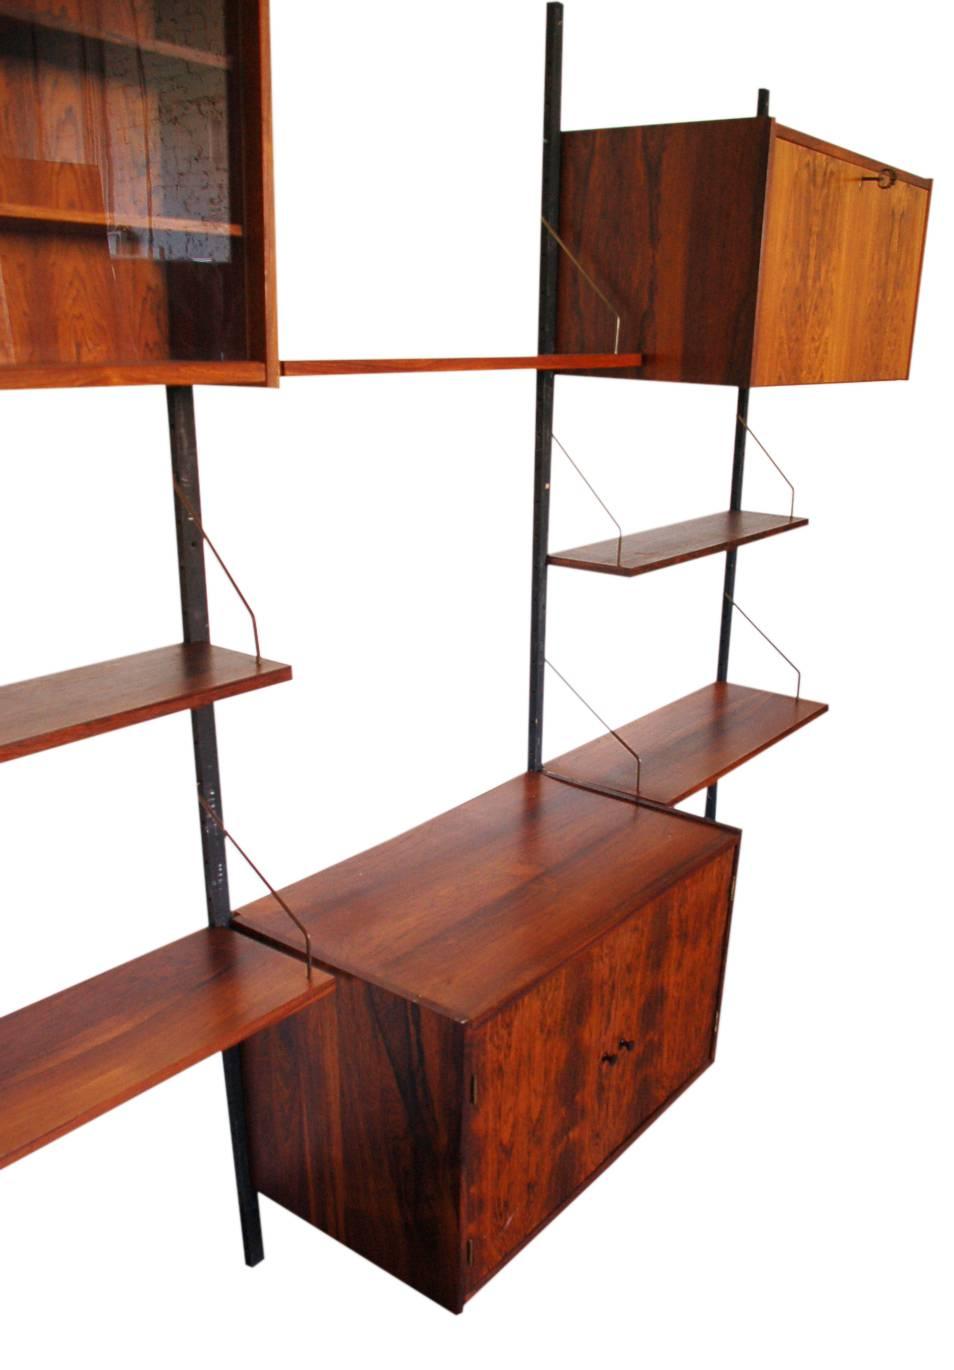 A three bay rosewood PS wall system designed by Peter Sorensen for Randers, circa 1960s. It features one pull down door bar cabinet, one glass display case with two shelves, one two door cabinet with interior shelf, and five floating shelves. All